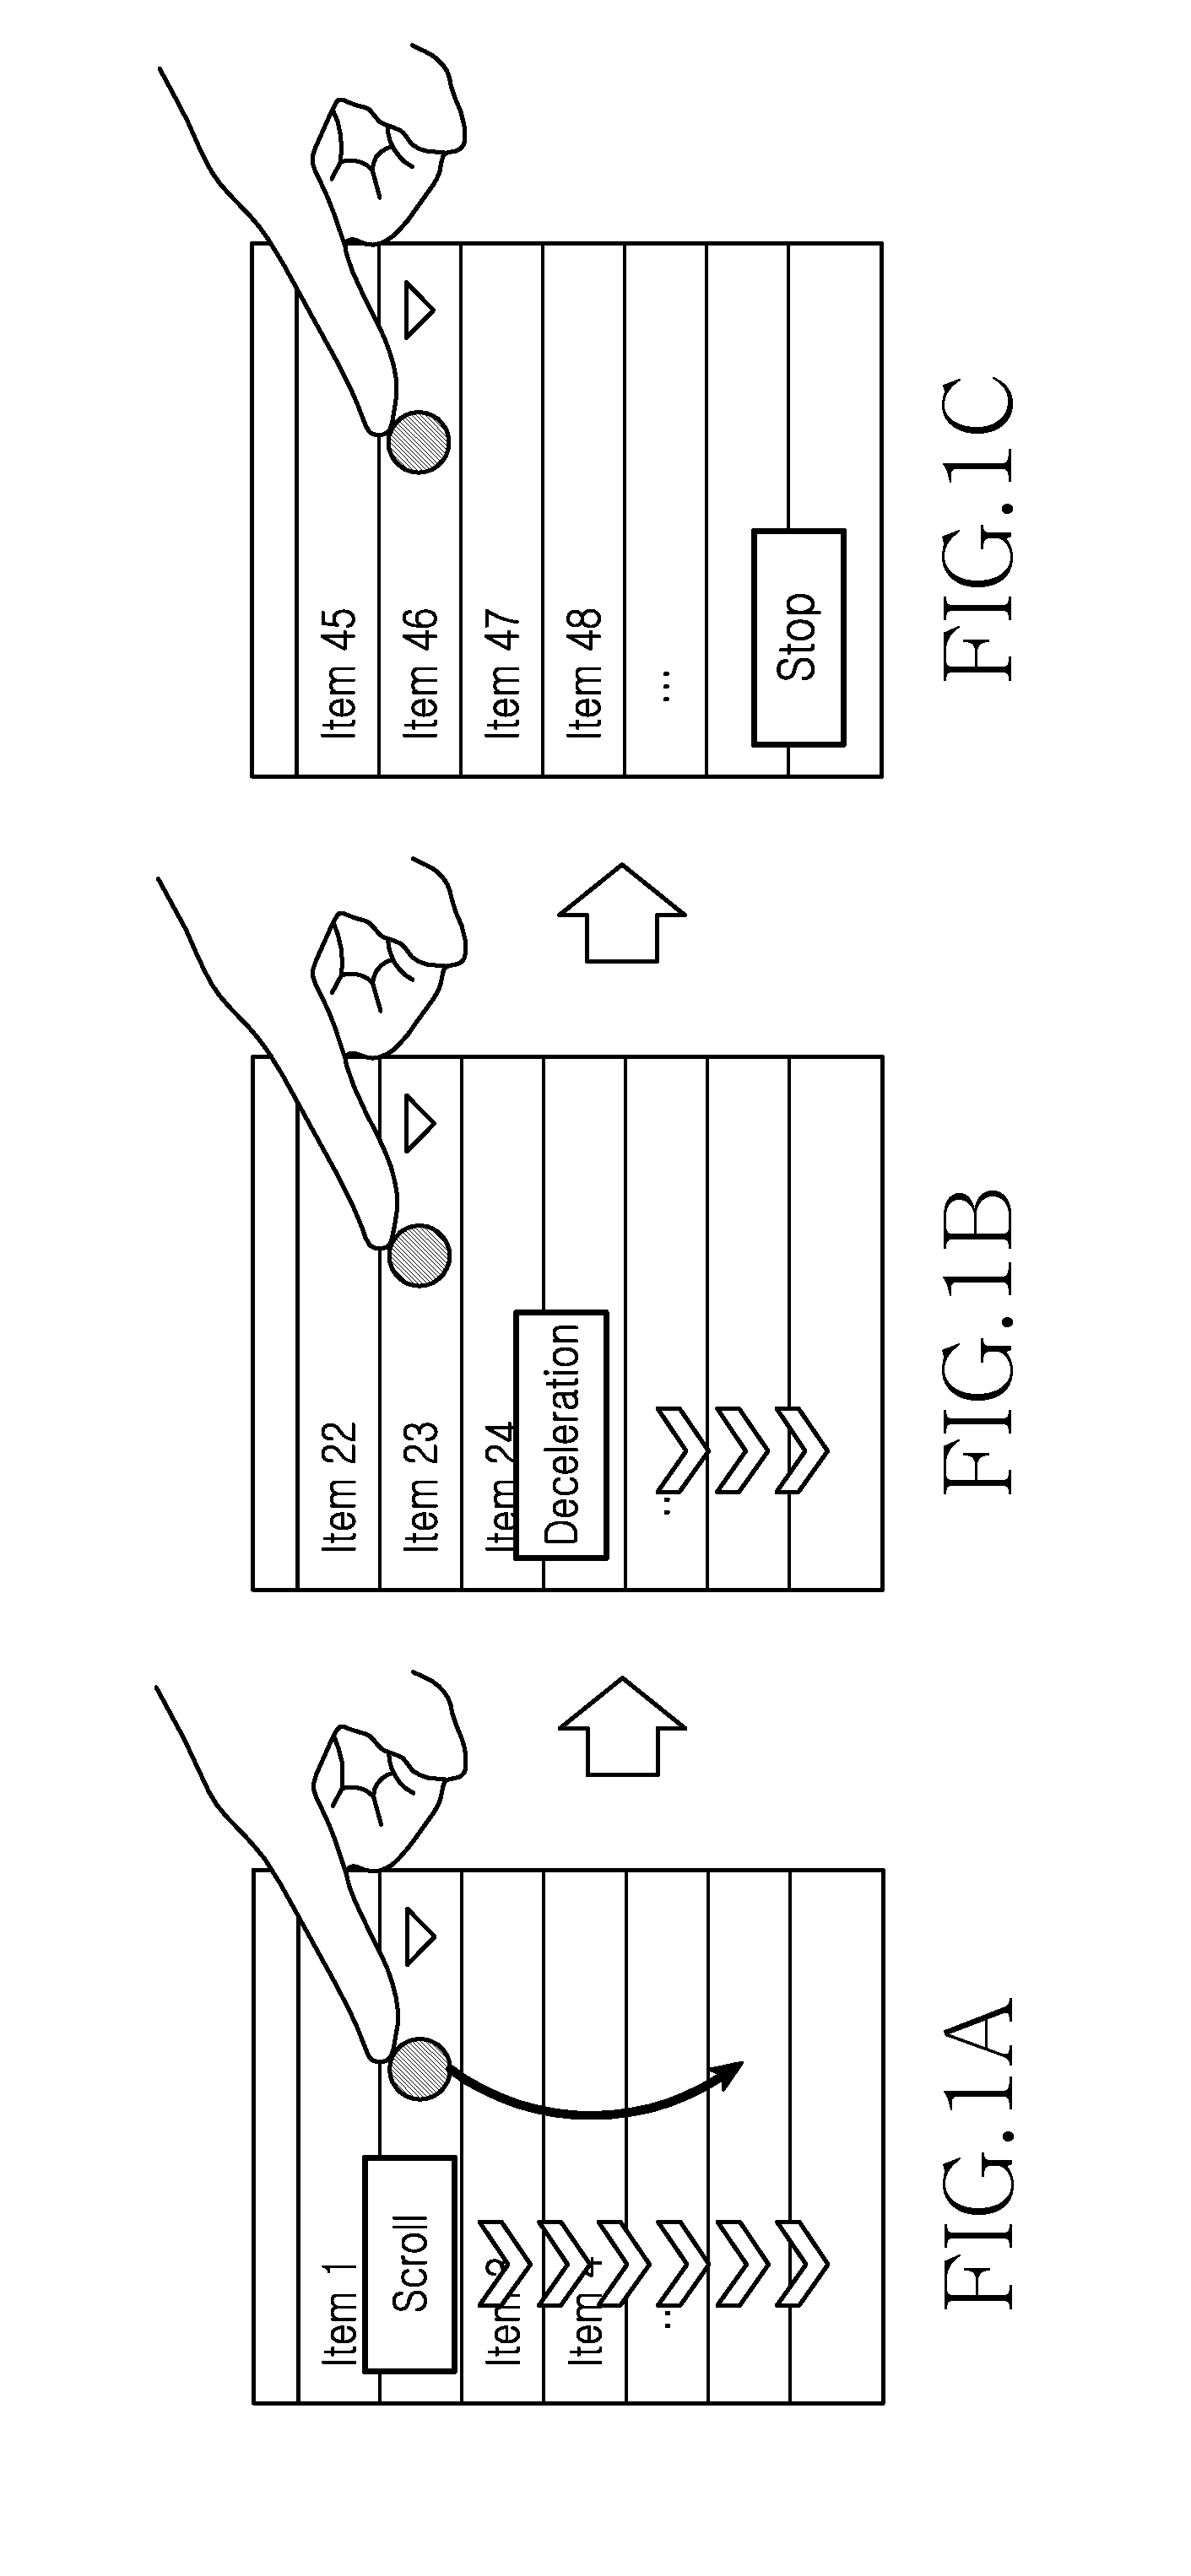 Method and apparatus for controlling user interface by using objects at a distance from a device without touching